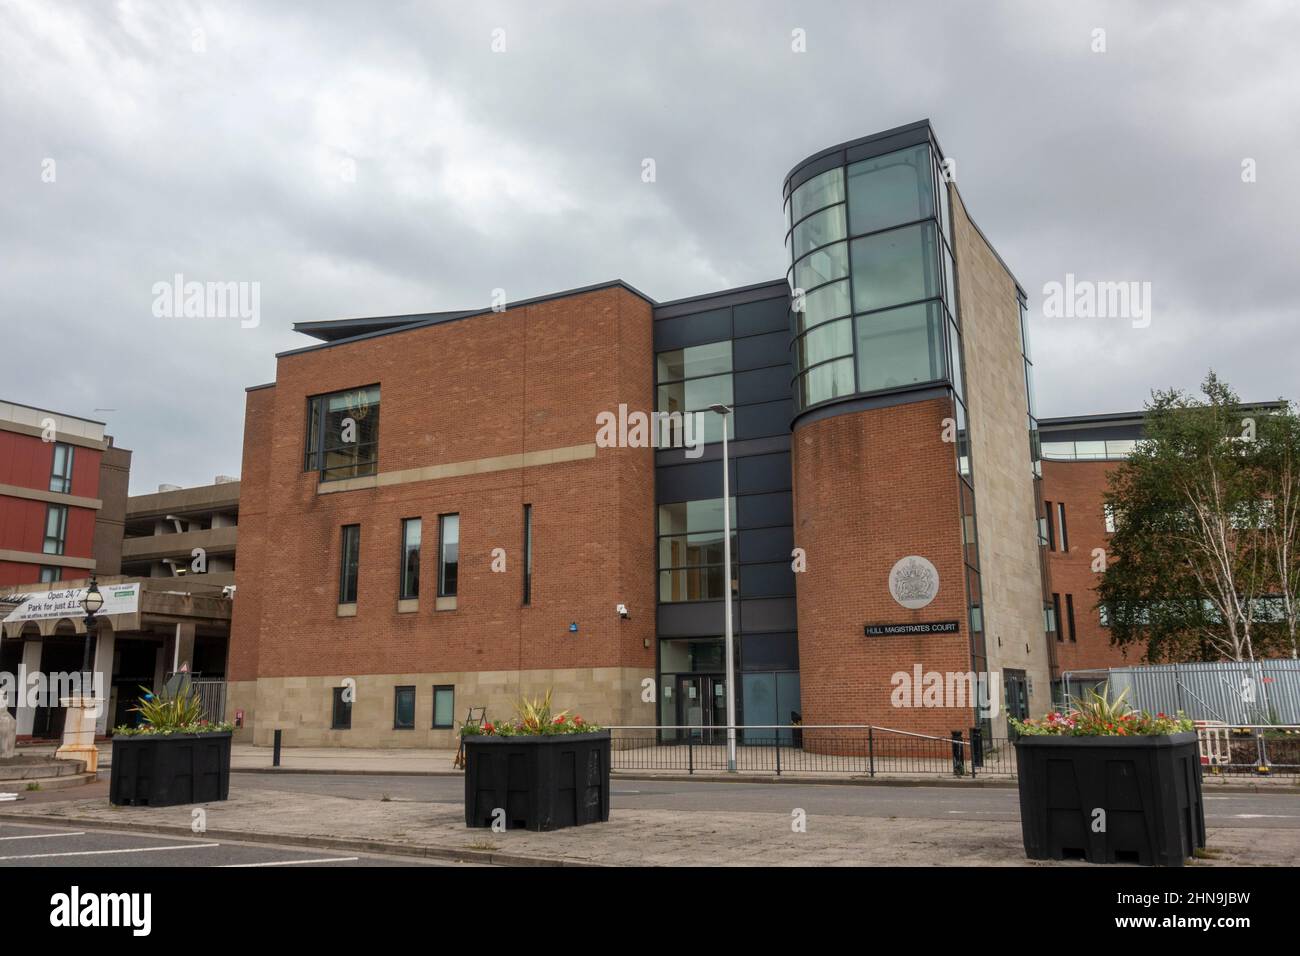 Hull Magistrates Court in the old docks area of Kingston Upon Hull, East Riding of Yorkshire, UK. Stock Photo